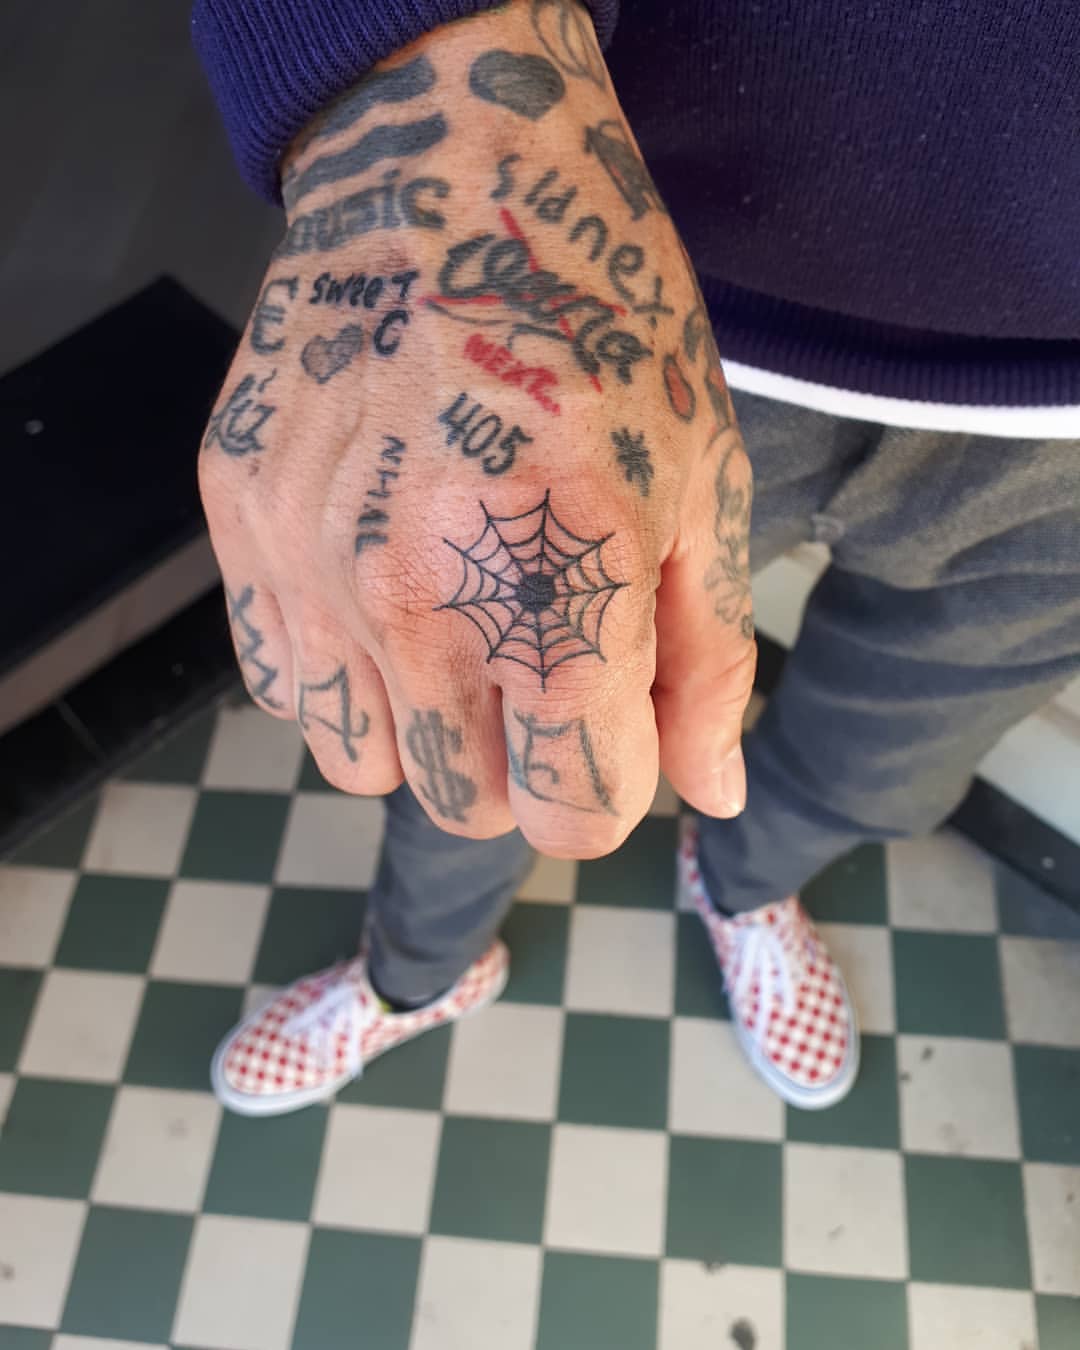 Eclectic Mix Of Knuckle And Hand Tattoos